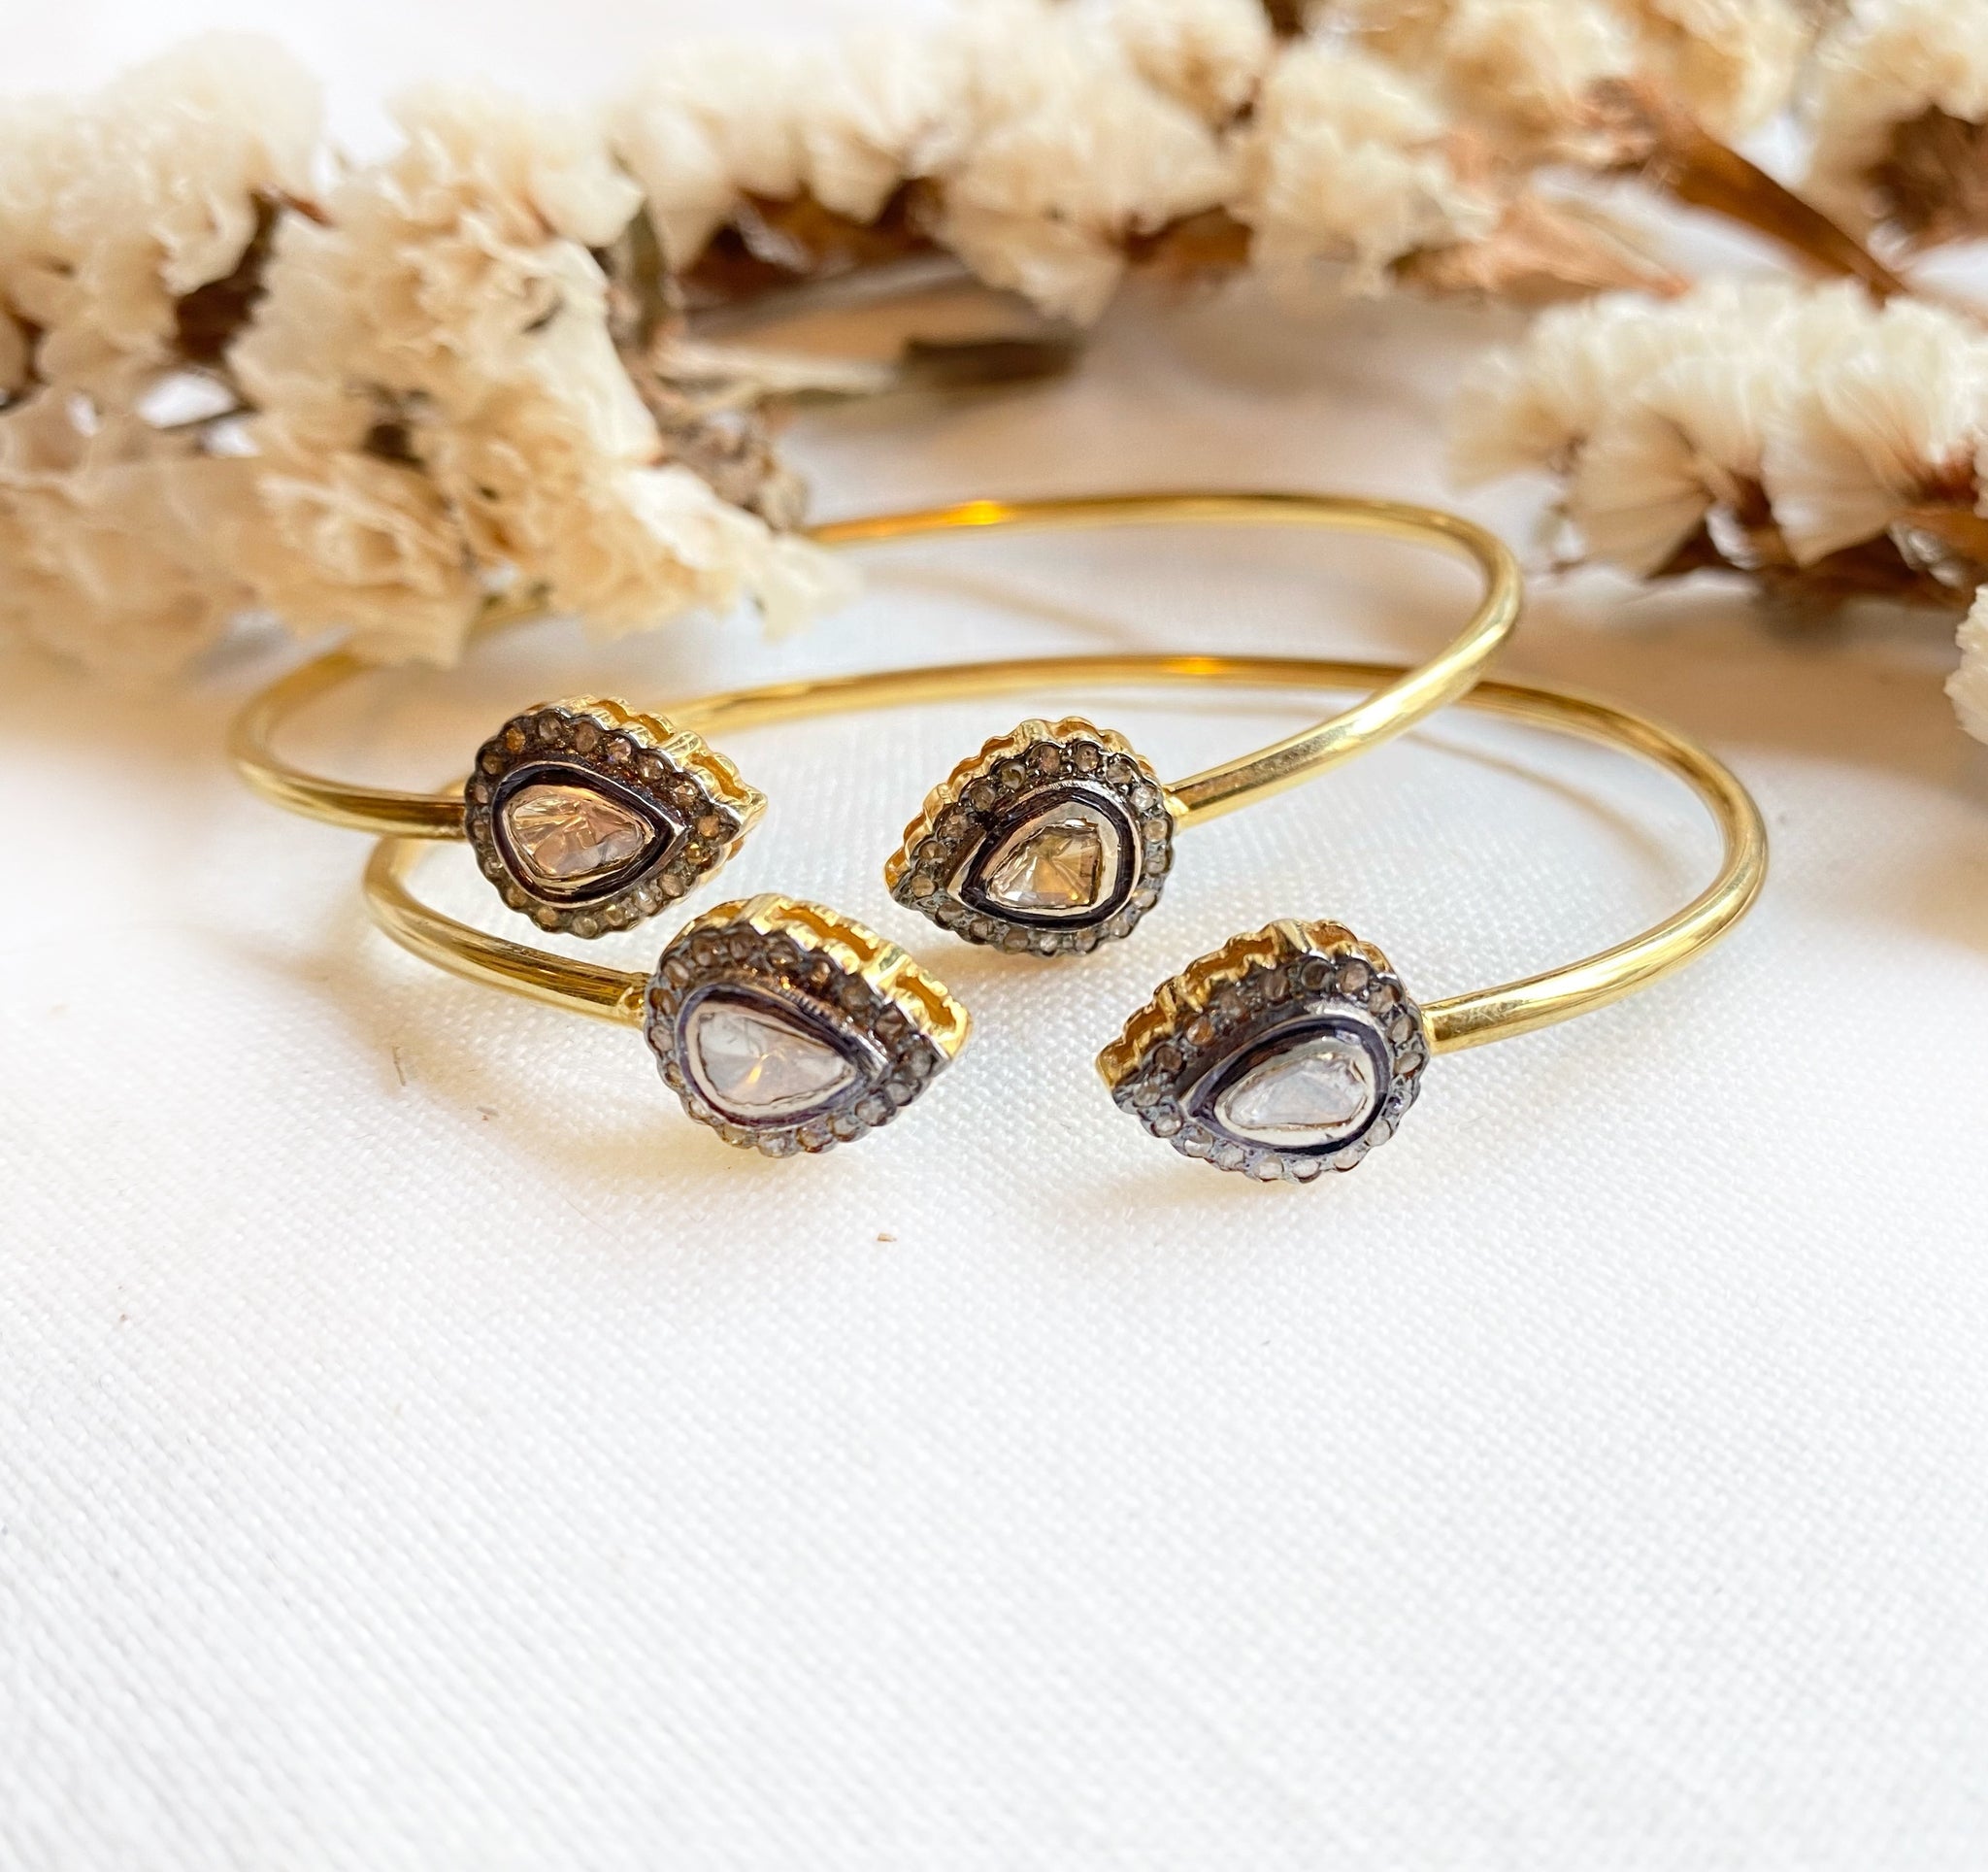 NEW - Polki bangles in silver and gold